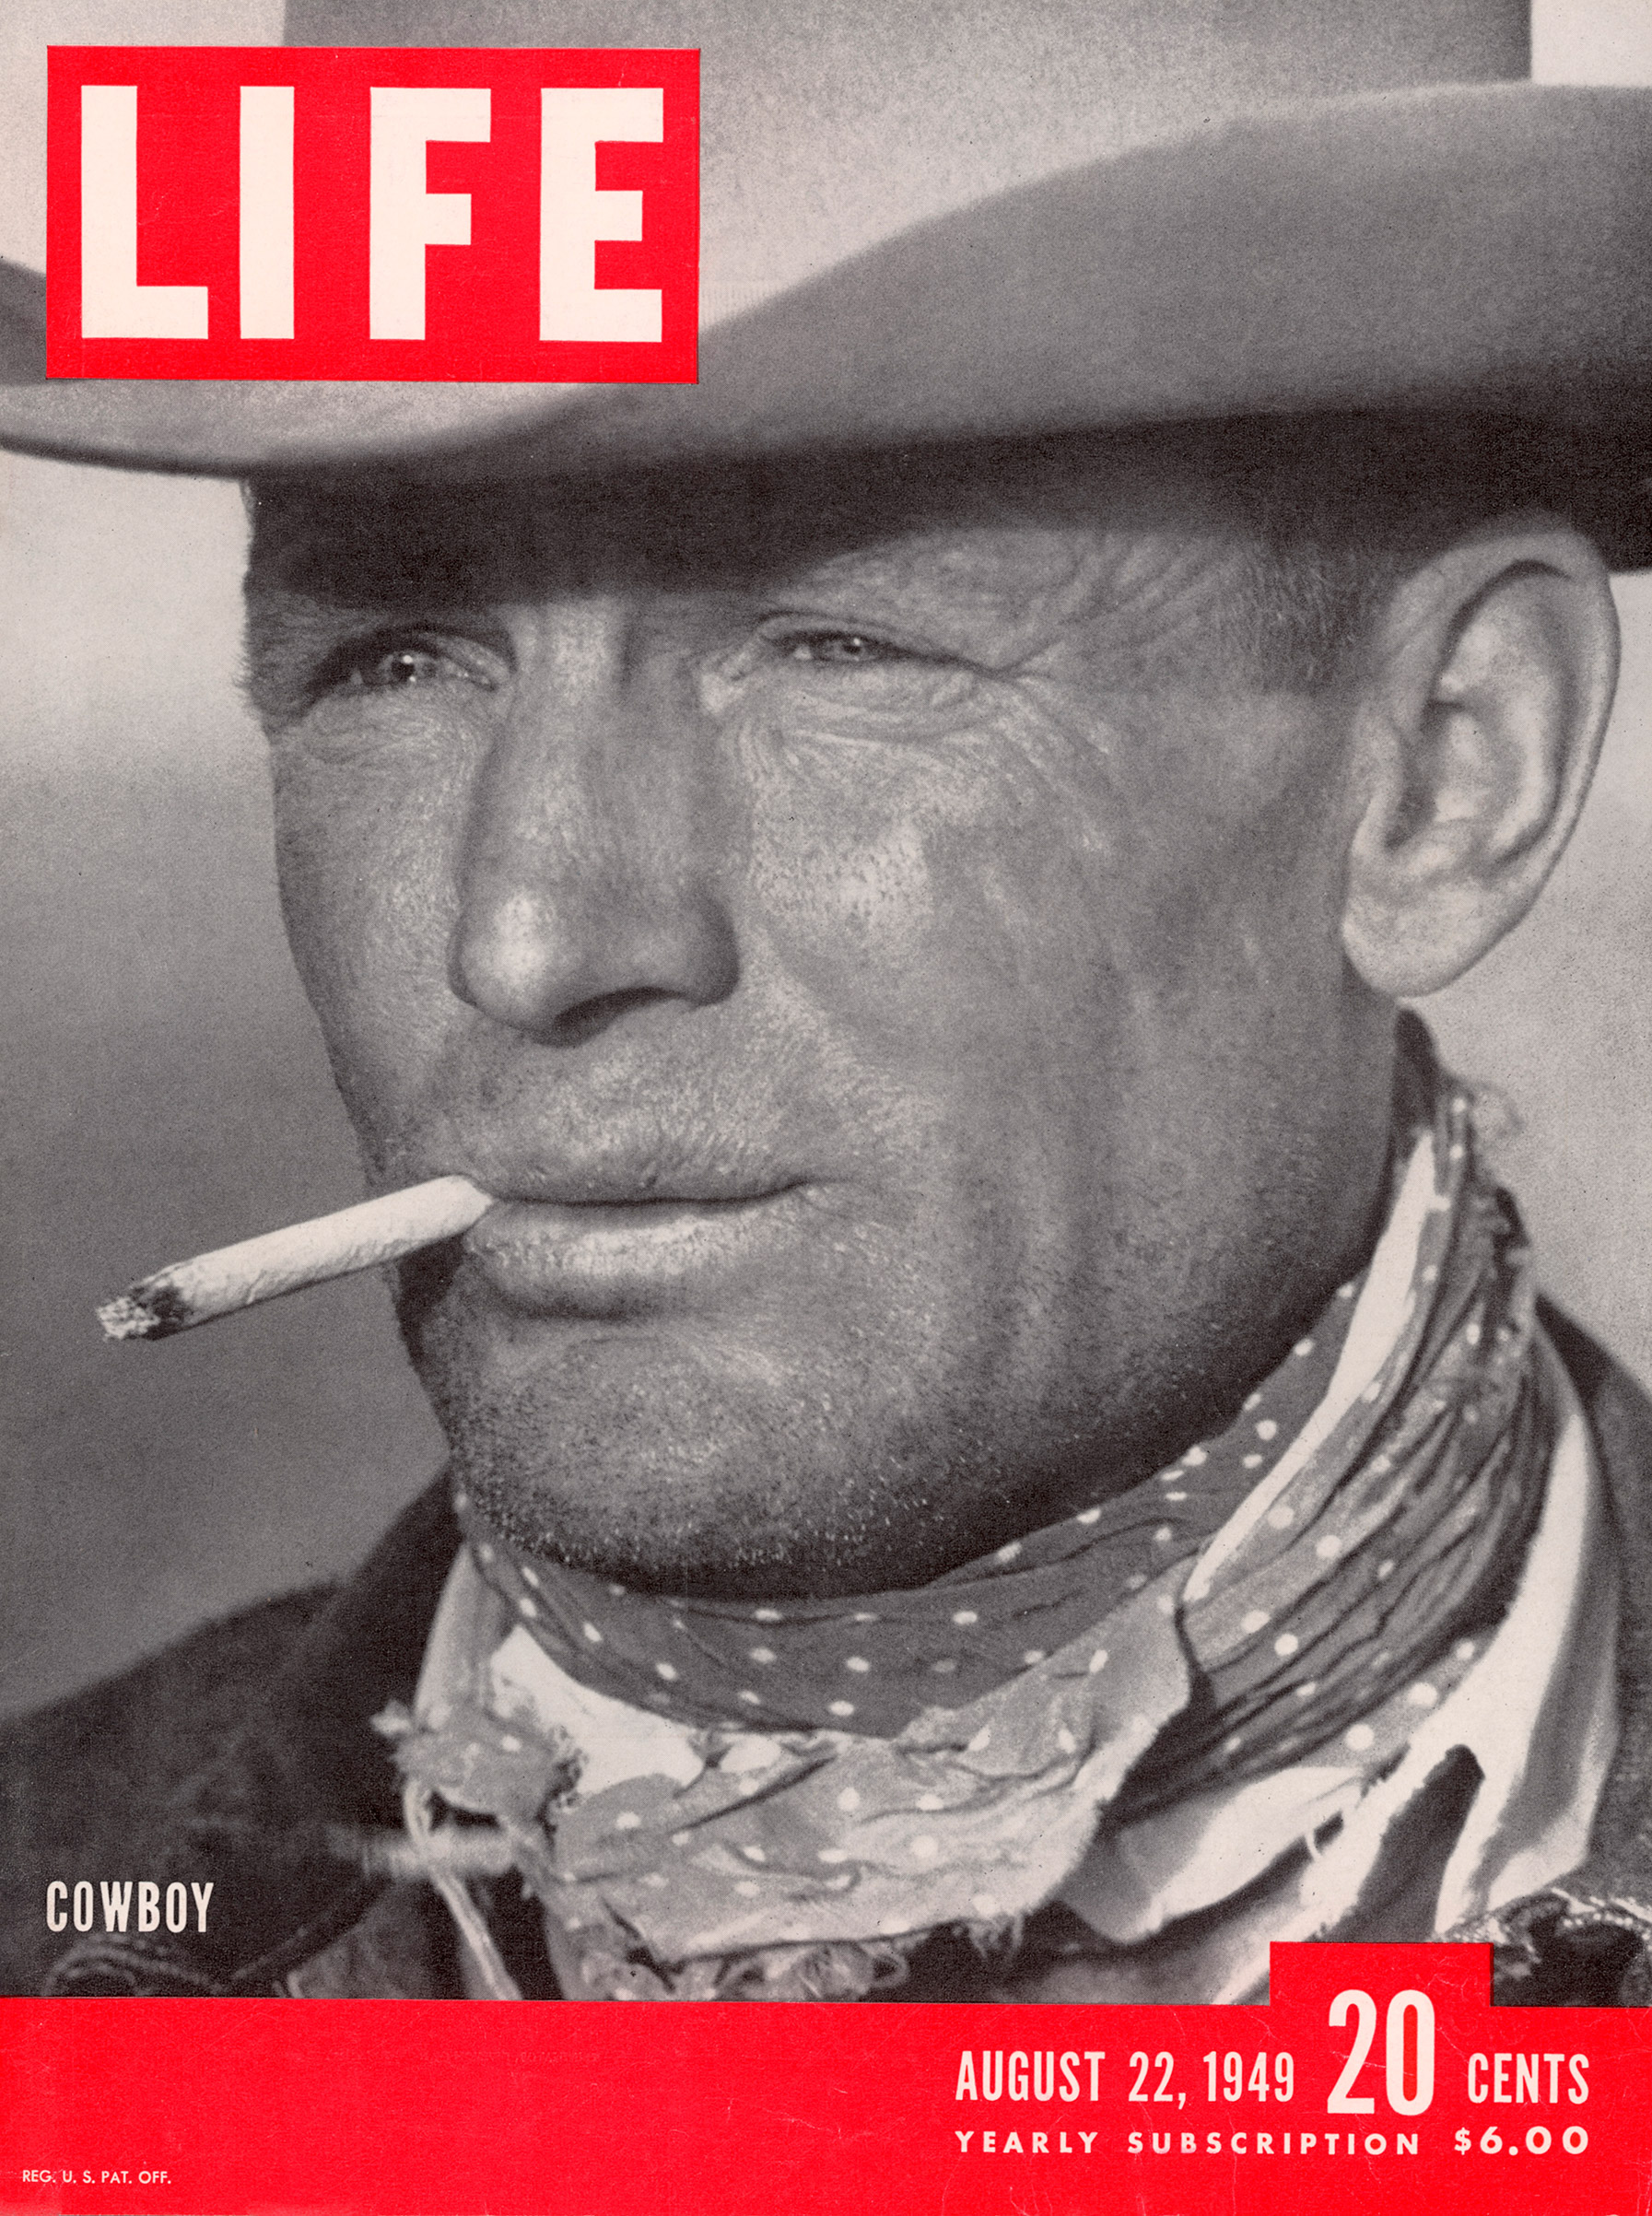 Aug. 22, 1949 cover of LIFE magazine featuring cowboy C. H. Long.